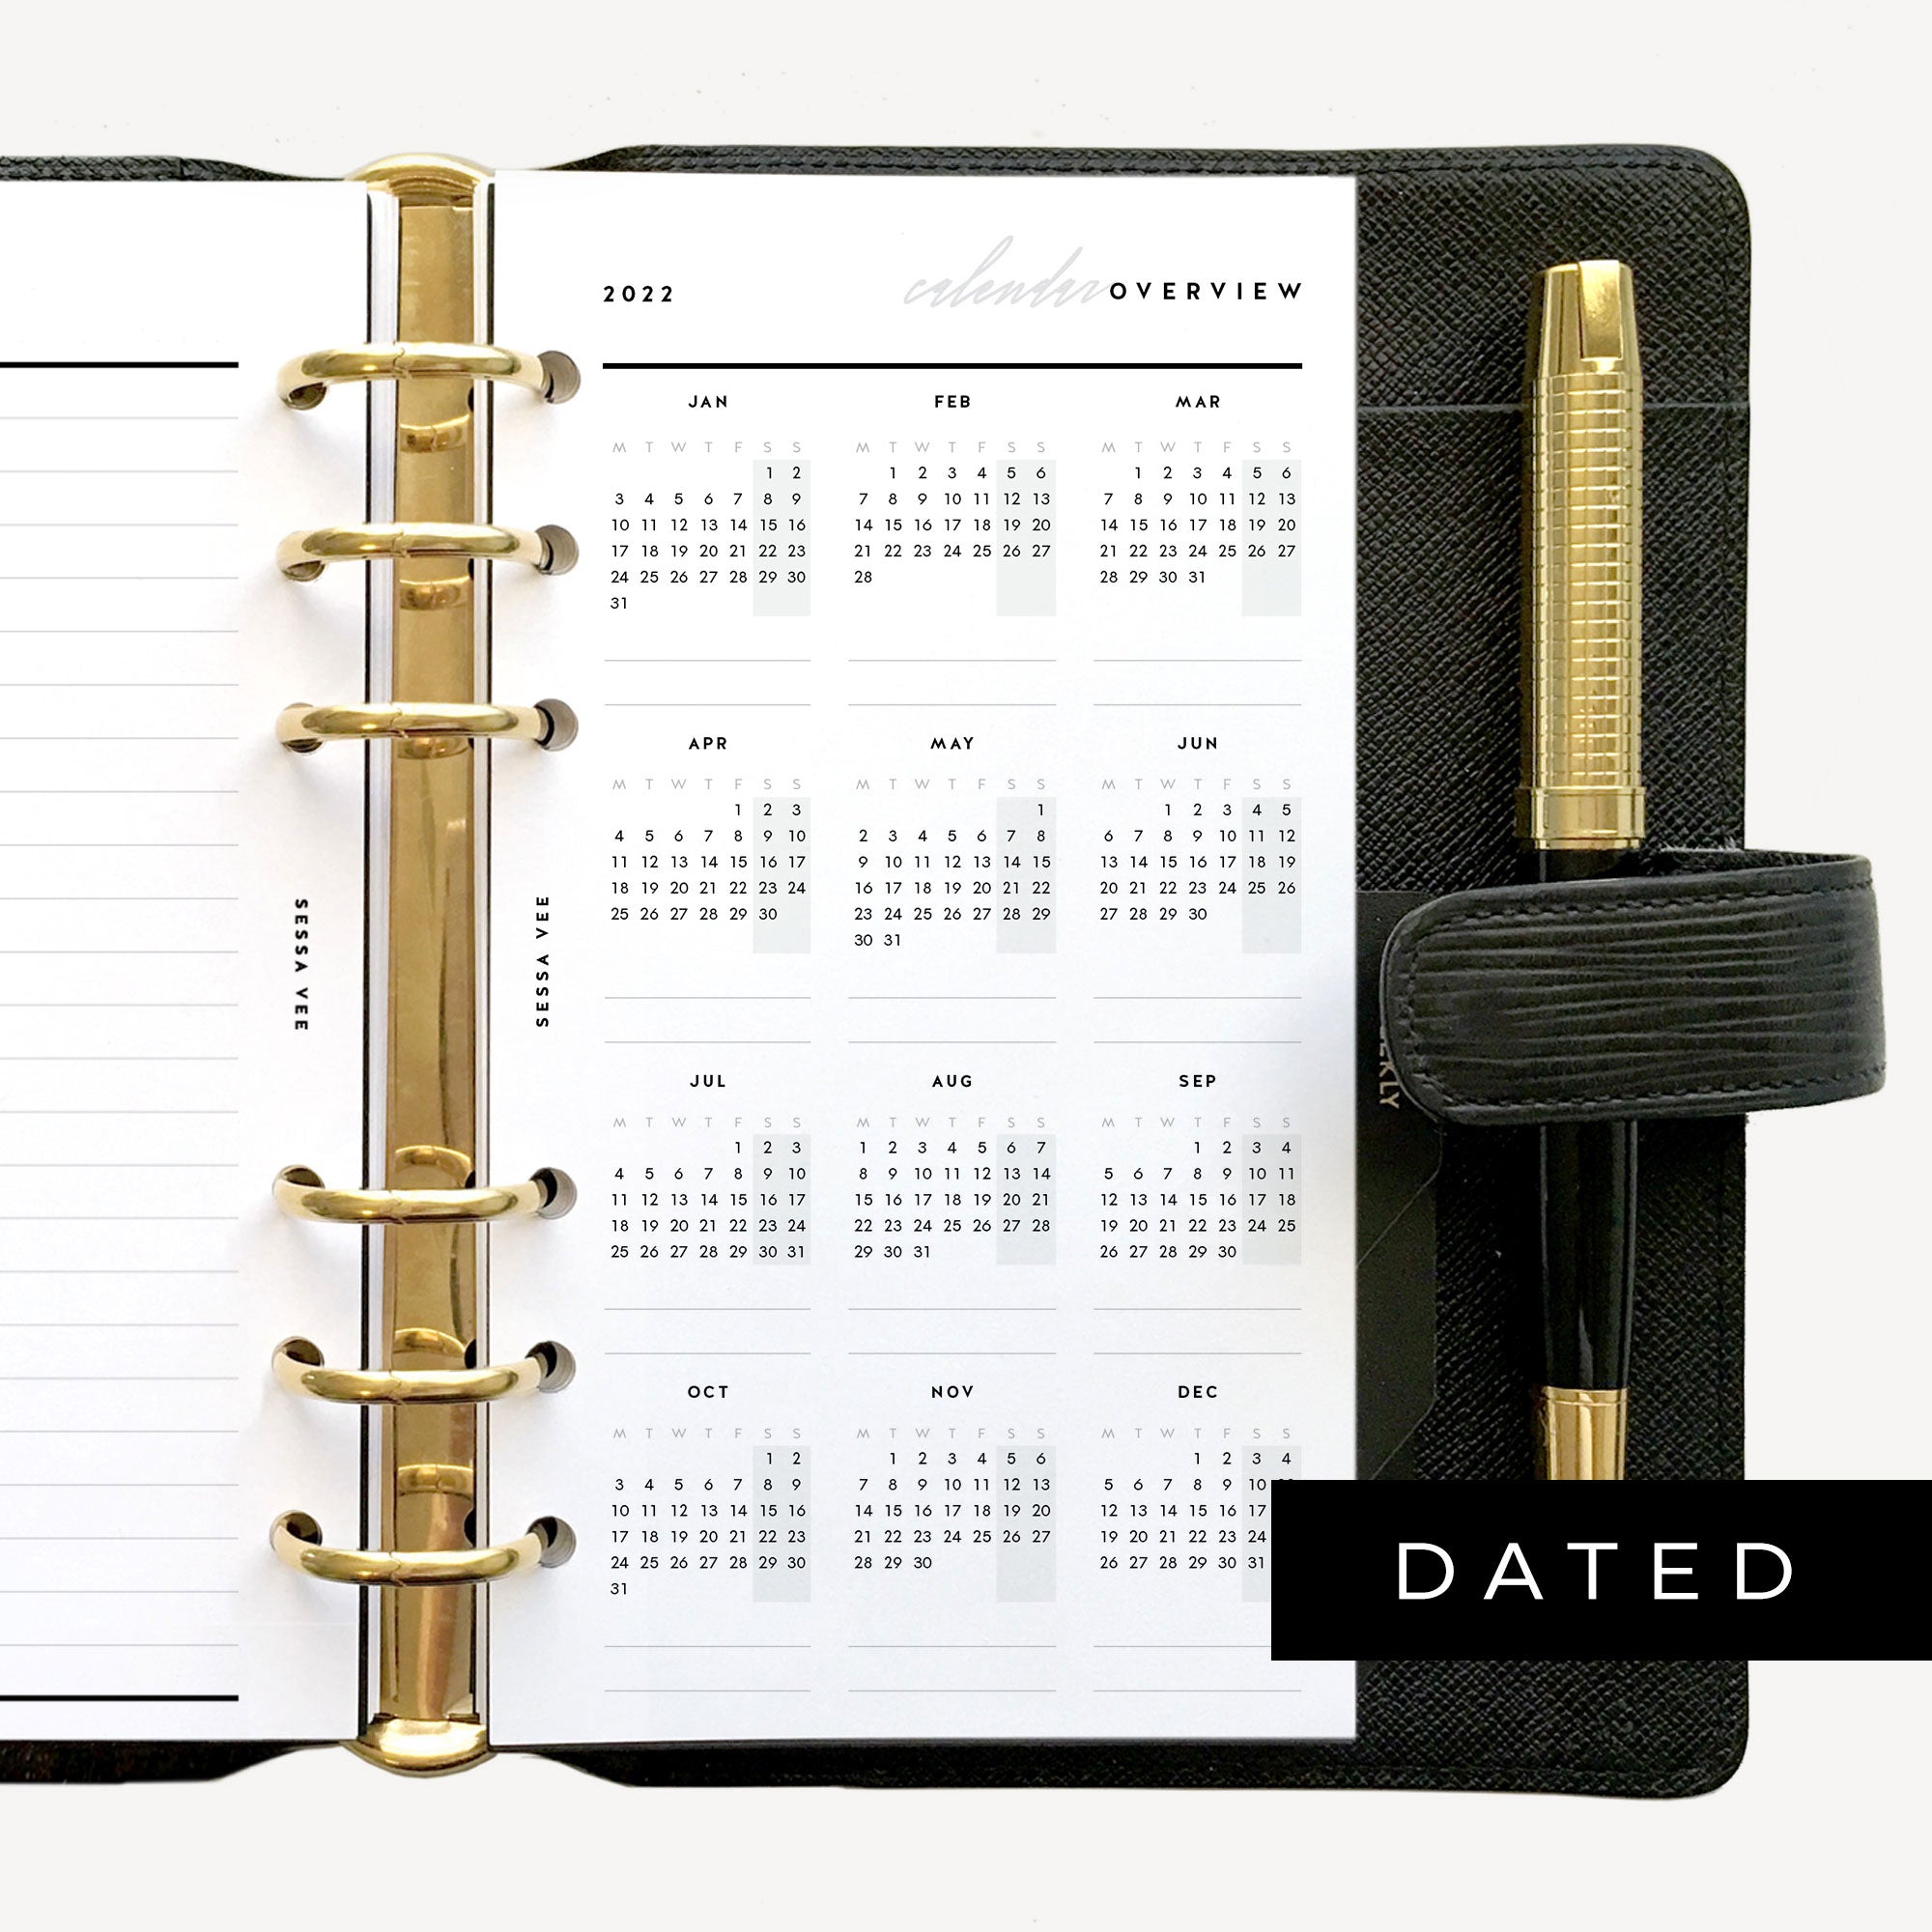 Personal Size Fold Out Yearly Planner Year at a Glance 